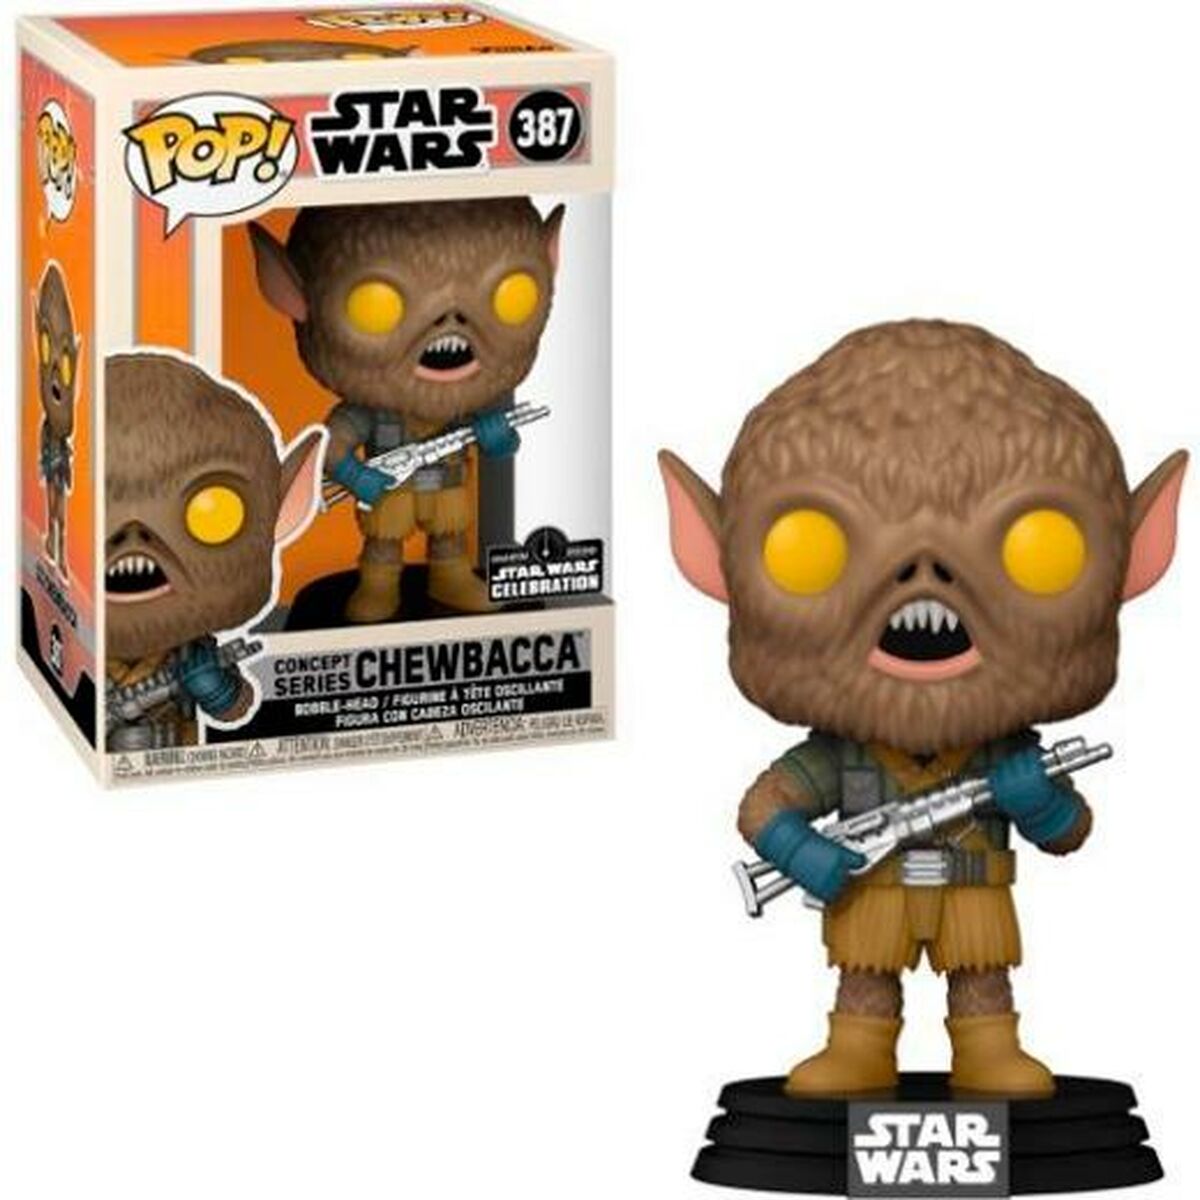 Action Figure Funko POP STAR WARS CONCEPT CHEWBACCA SERIES EXCLUSIVE Nº 387